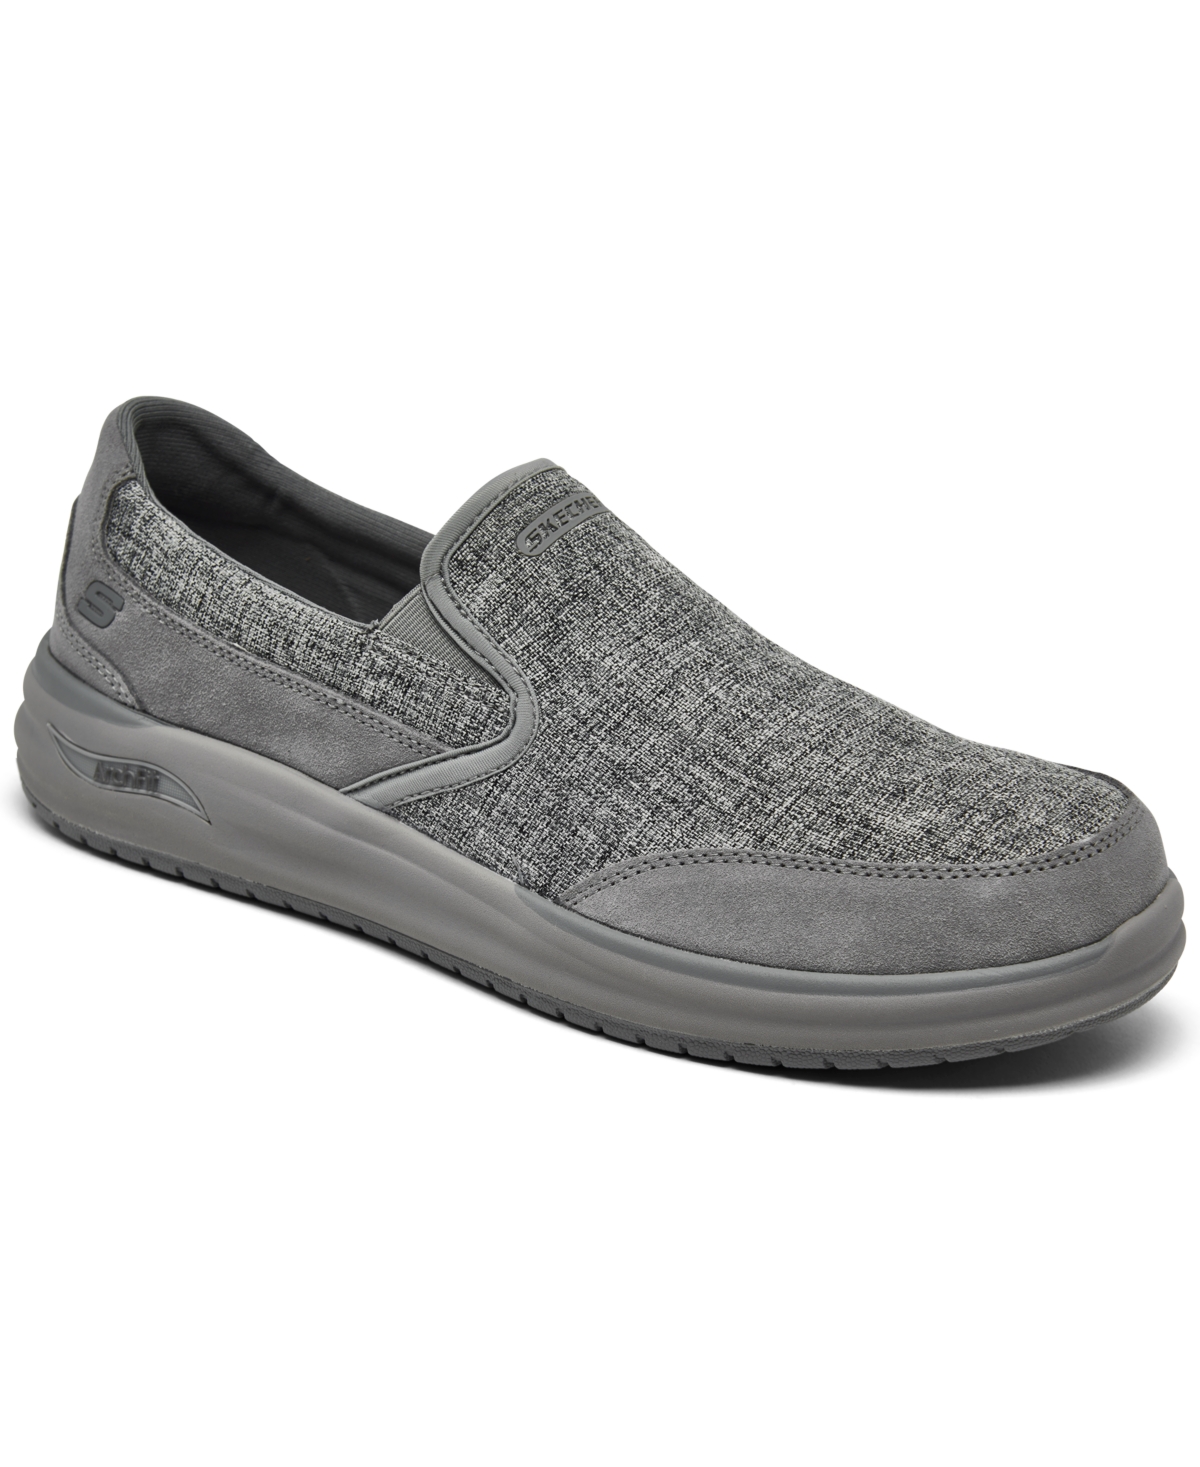 Skechers Men's Relaxed Fit- Arch Fit Melo- Ranston Slip-on Casual ...